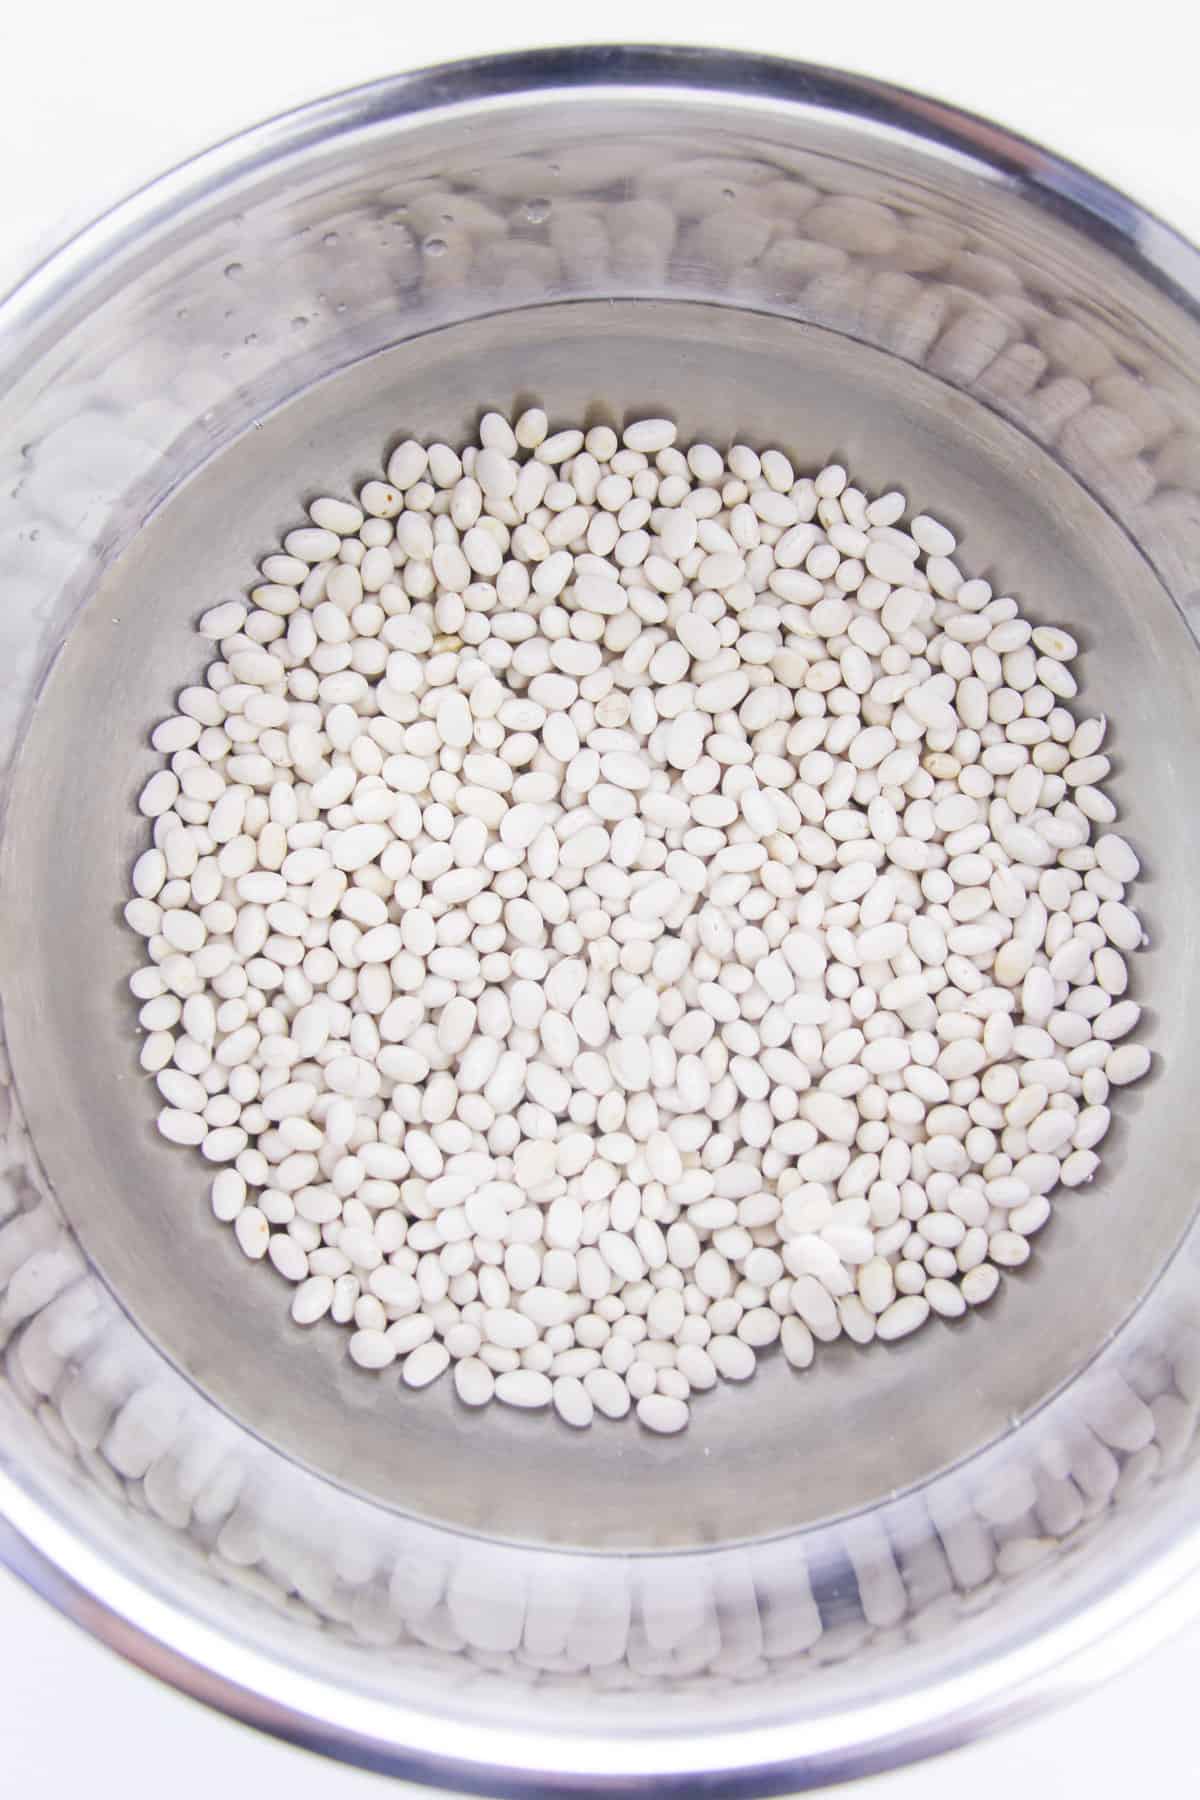 Dry white navy beans in stainless steel pot.